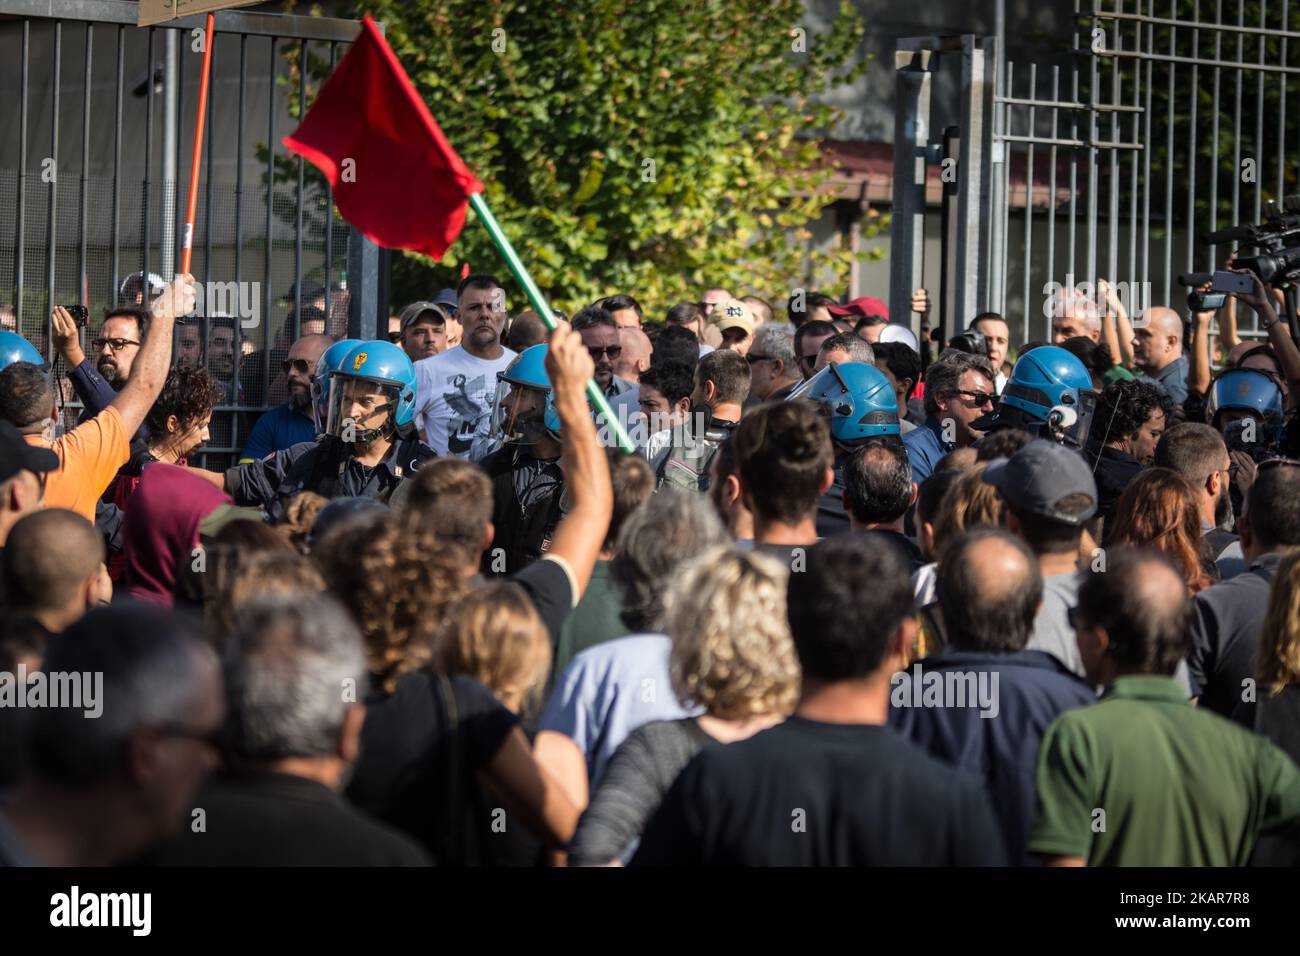 Clashes between anti-fascists and militants of CasaPound at Tiburtino III for the extraordinary City Council, convened at the request of the exponents of the far right to decide on the future of the centre of Reception of the Red Cross in Via del Frantoio, Rome, Italy, on 13 September 2017 (Photo by Andrea Ronchini/NurPhoto) Stock Photo